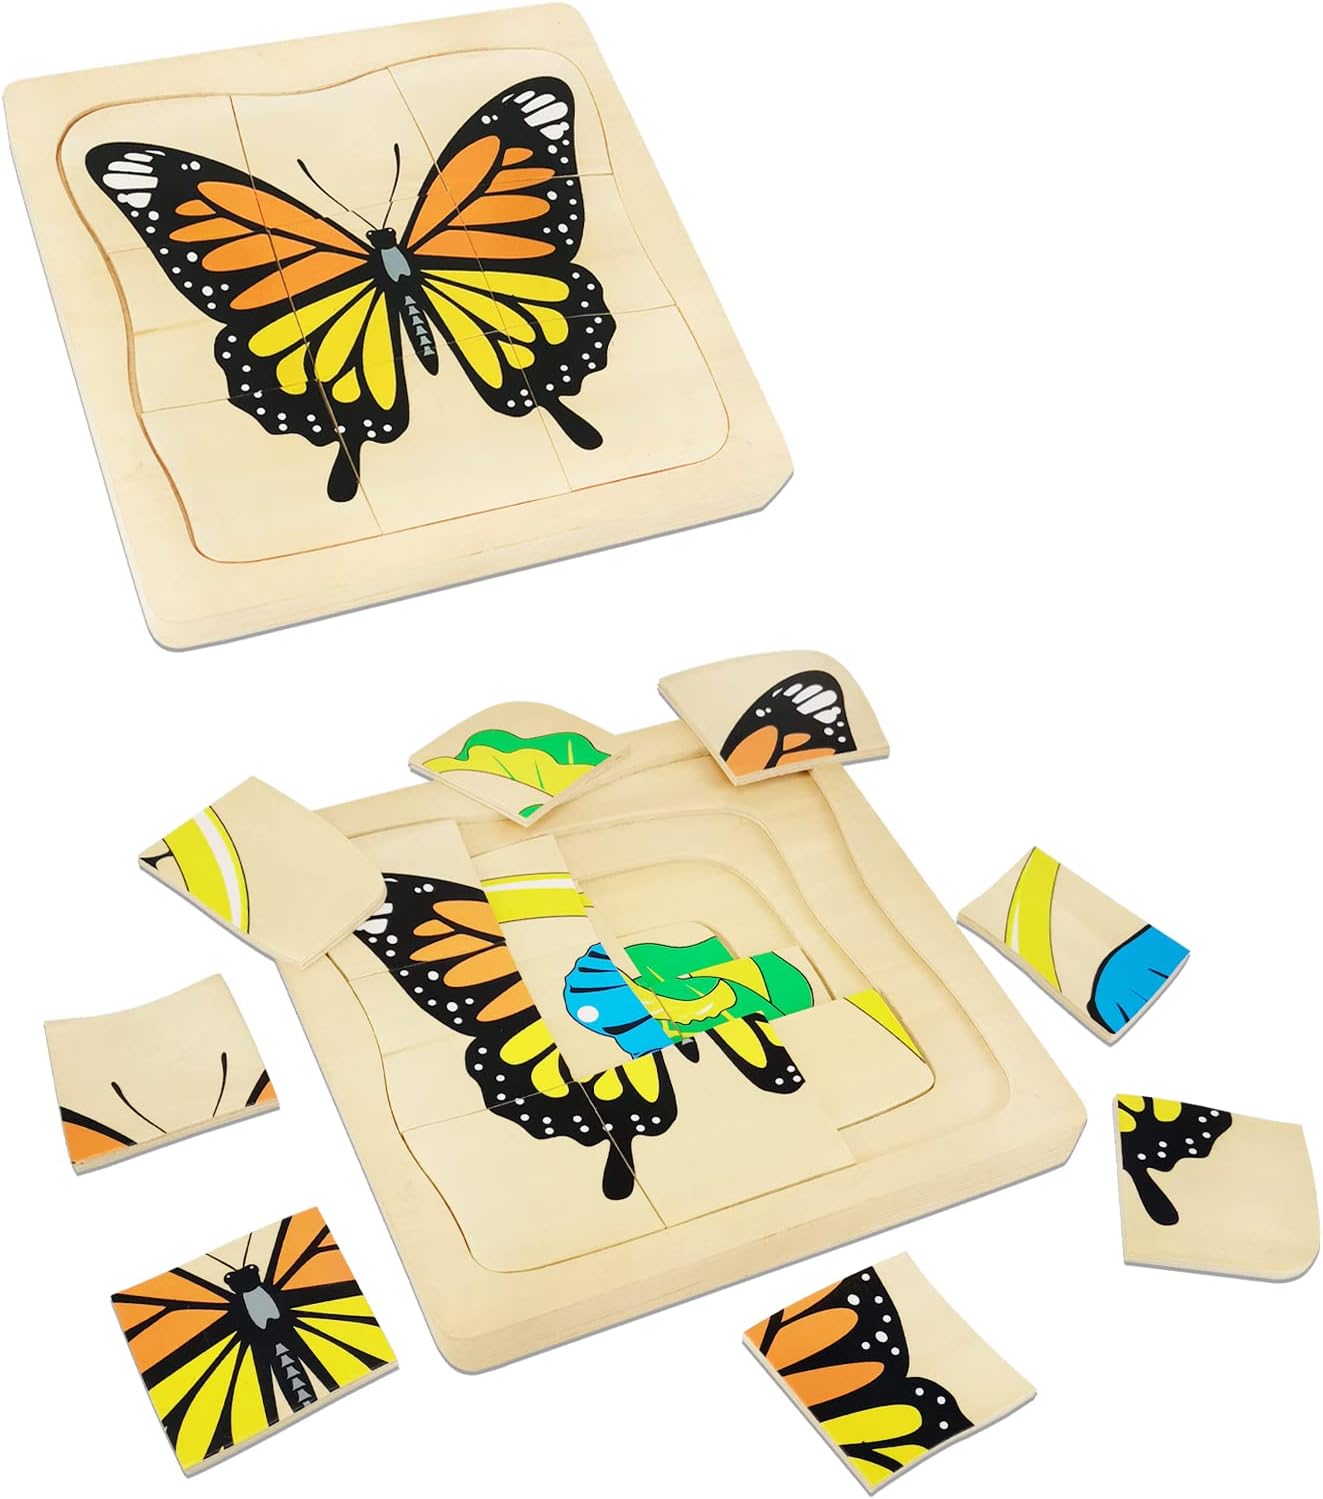 Montessori Wooden Puzzles for Kids Ages 4-8, 4 Layer Life Cycle of Butterfly Jigsaw Puzzle for Toddlers, Children Preschool Learning Educational Puzzles Toys for Boys and Girls (Butterfly)